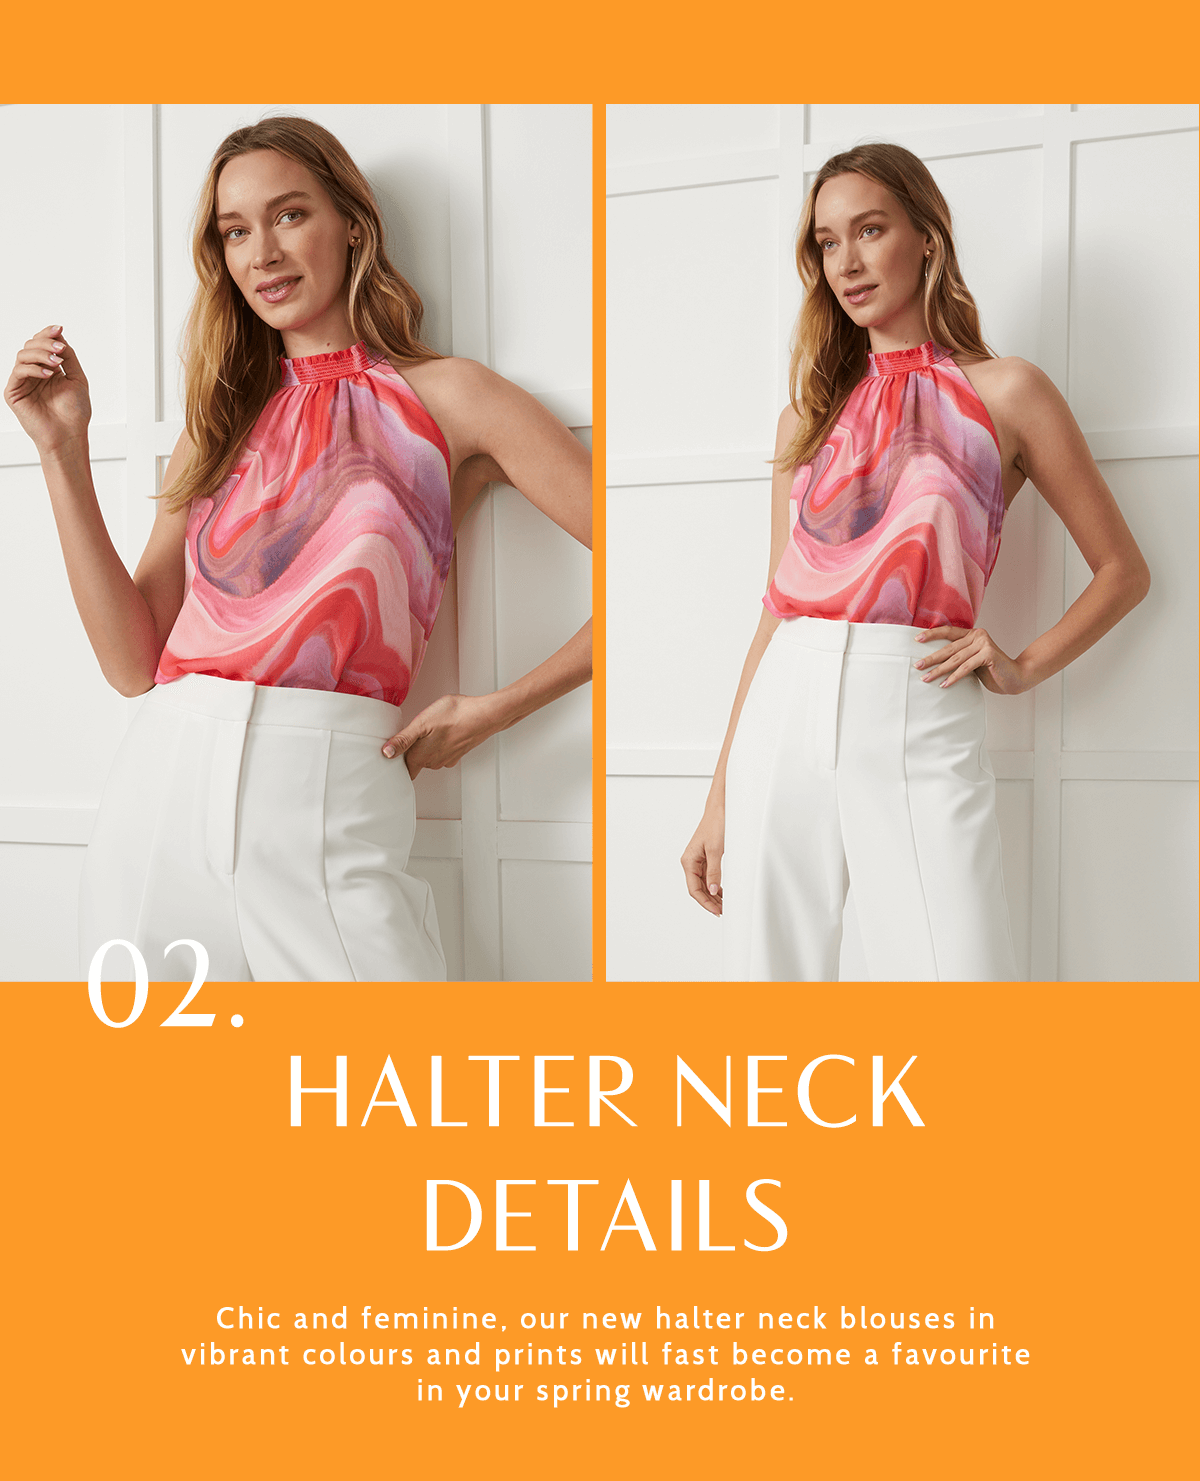 Halter neck details Chic and feminine, our new halter neck blouses in vibrant colours and prints will fast become a favourite in your spring wardrobe. 